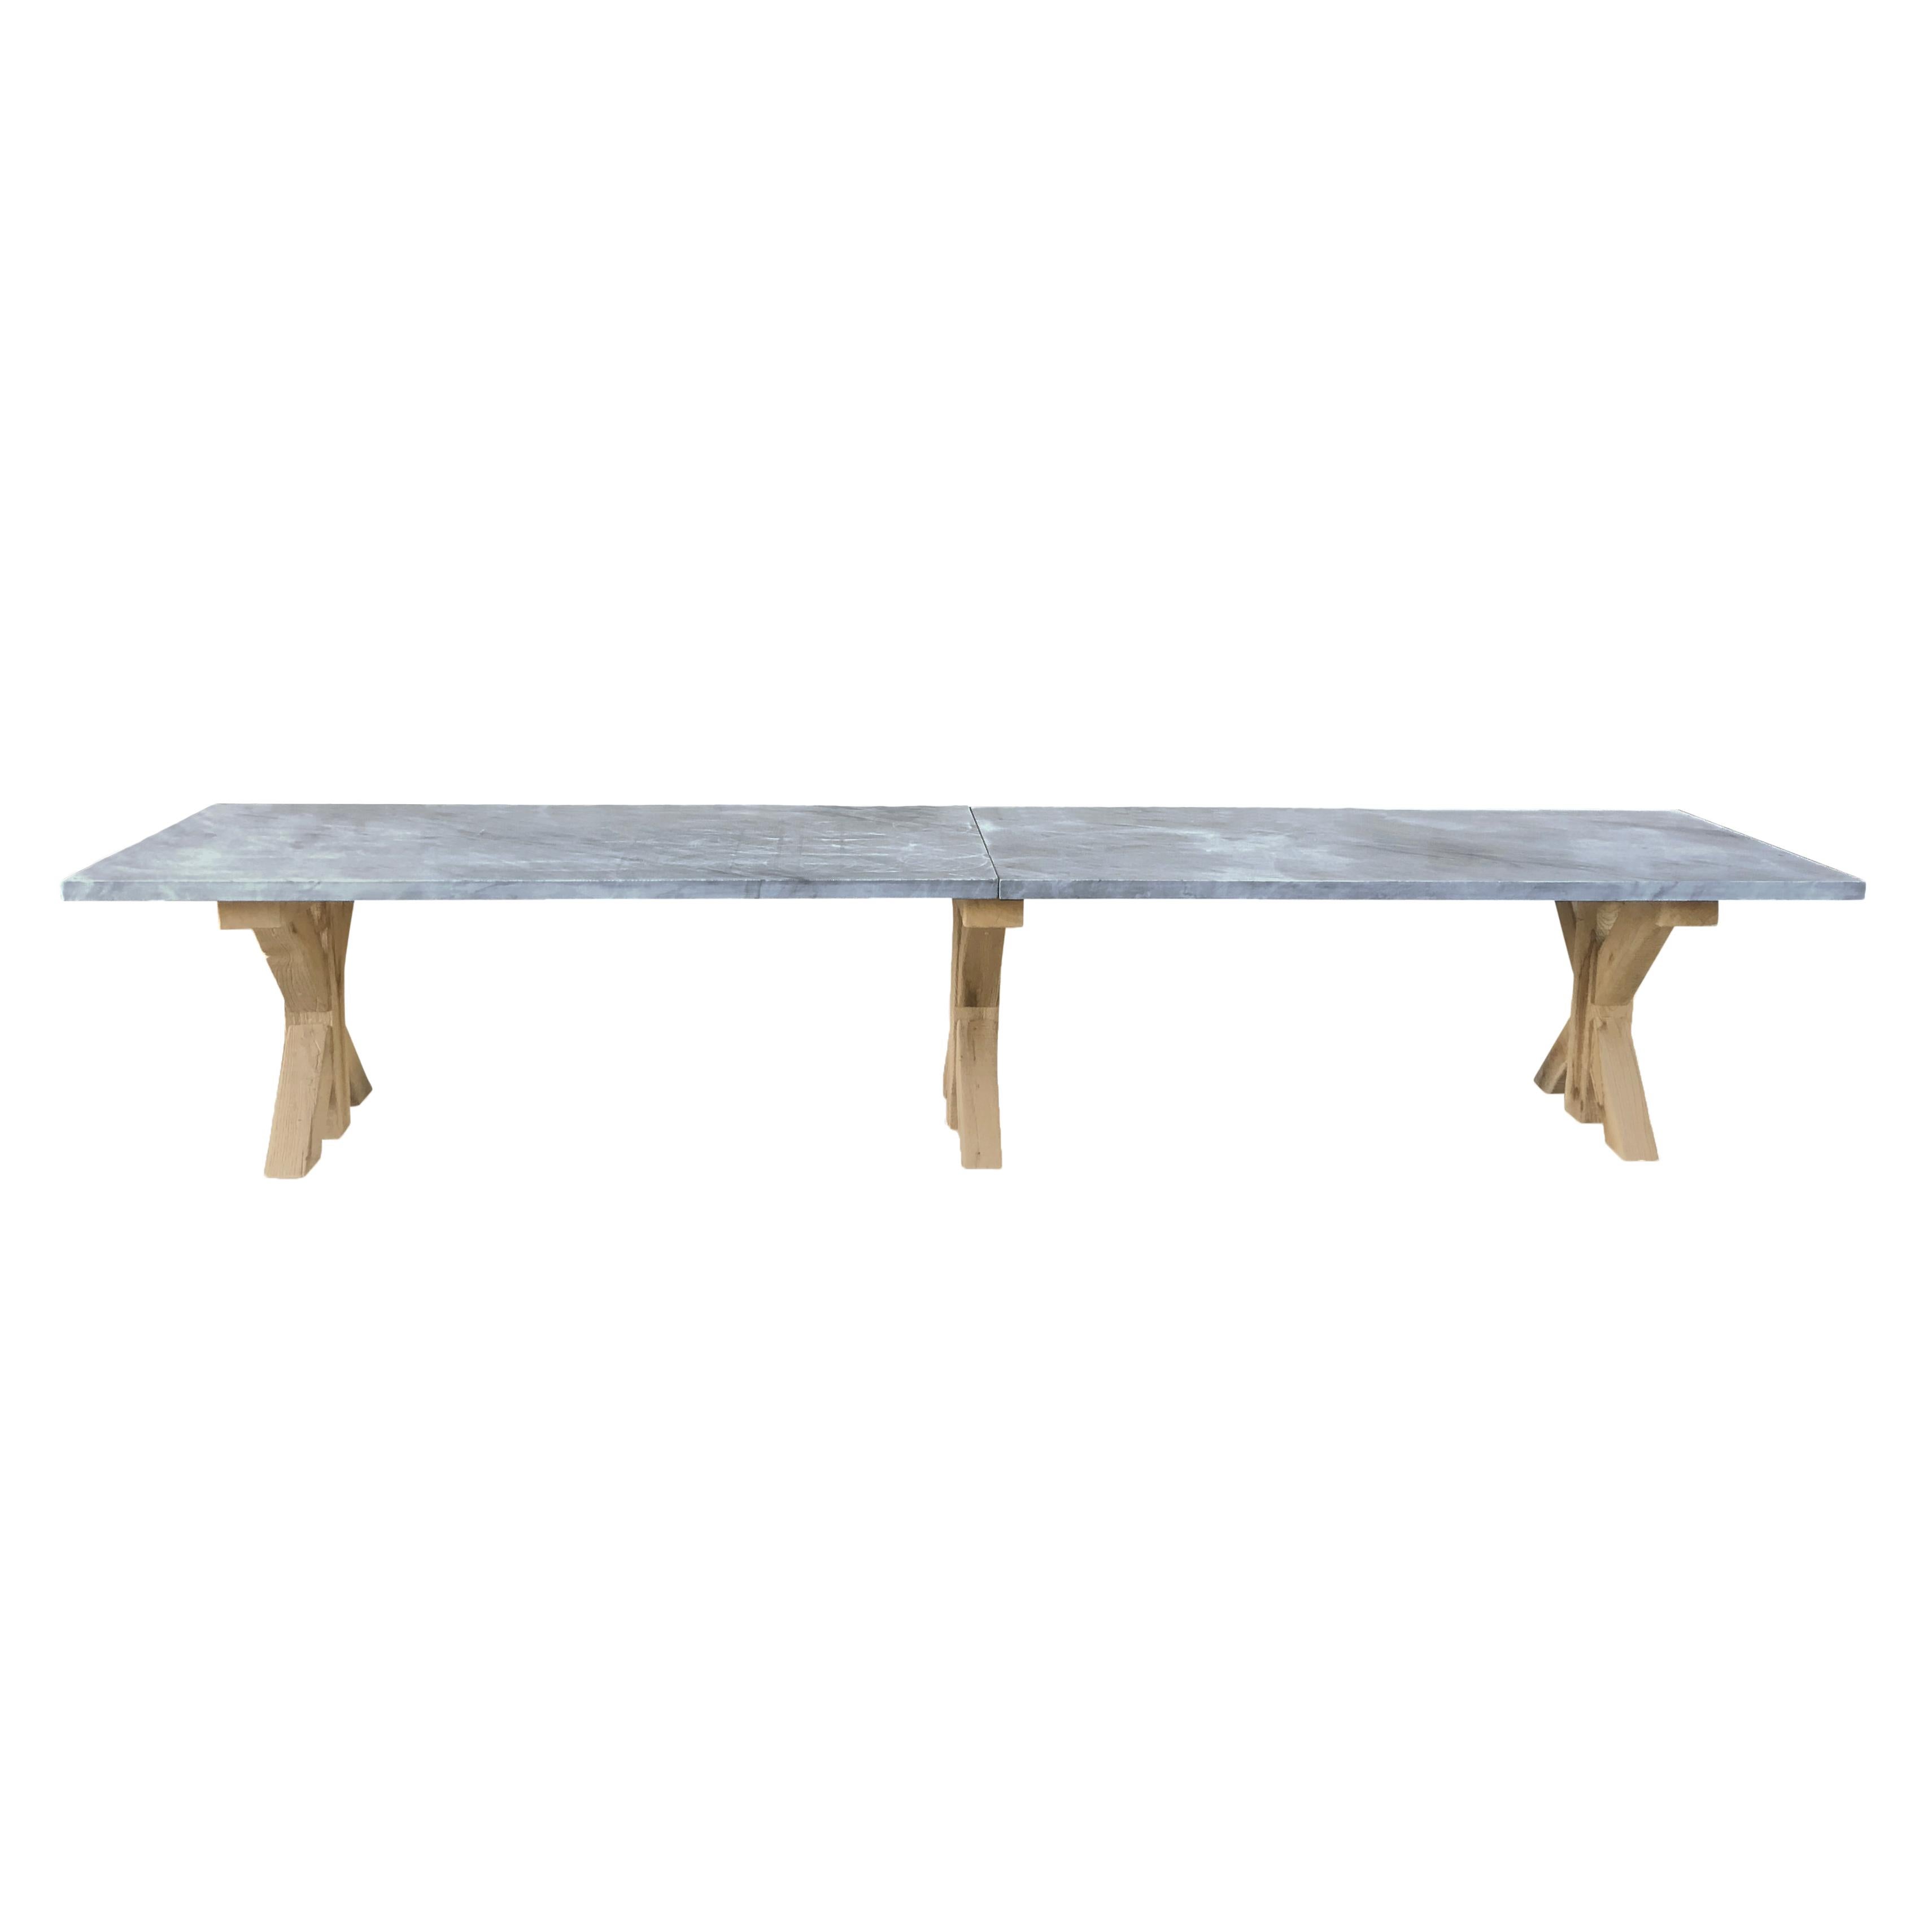 Rustic table base in oakwood with three legs and a sandblasted oversized grey marble top.

Measures: tabletop thickness 2